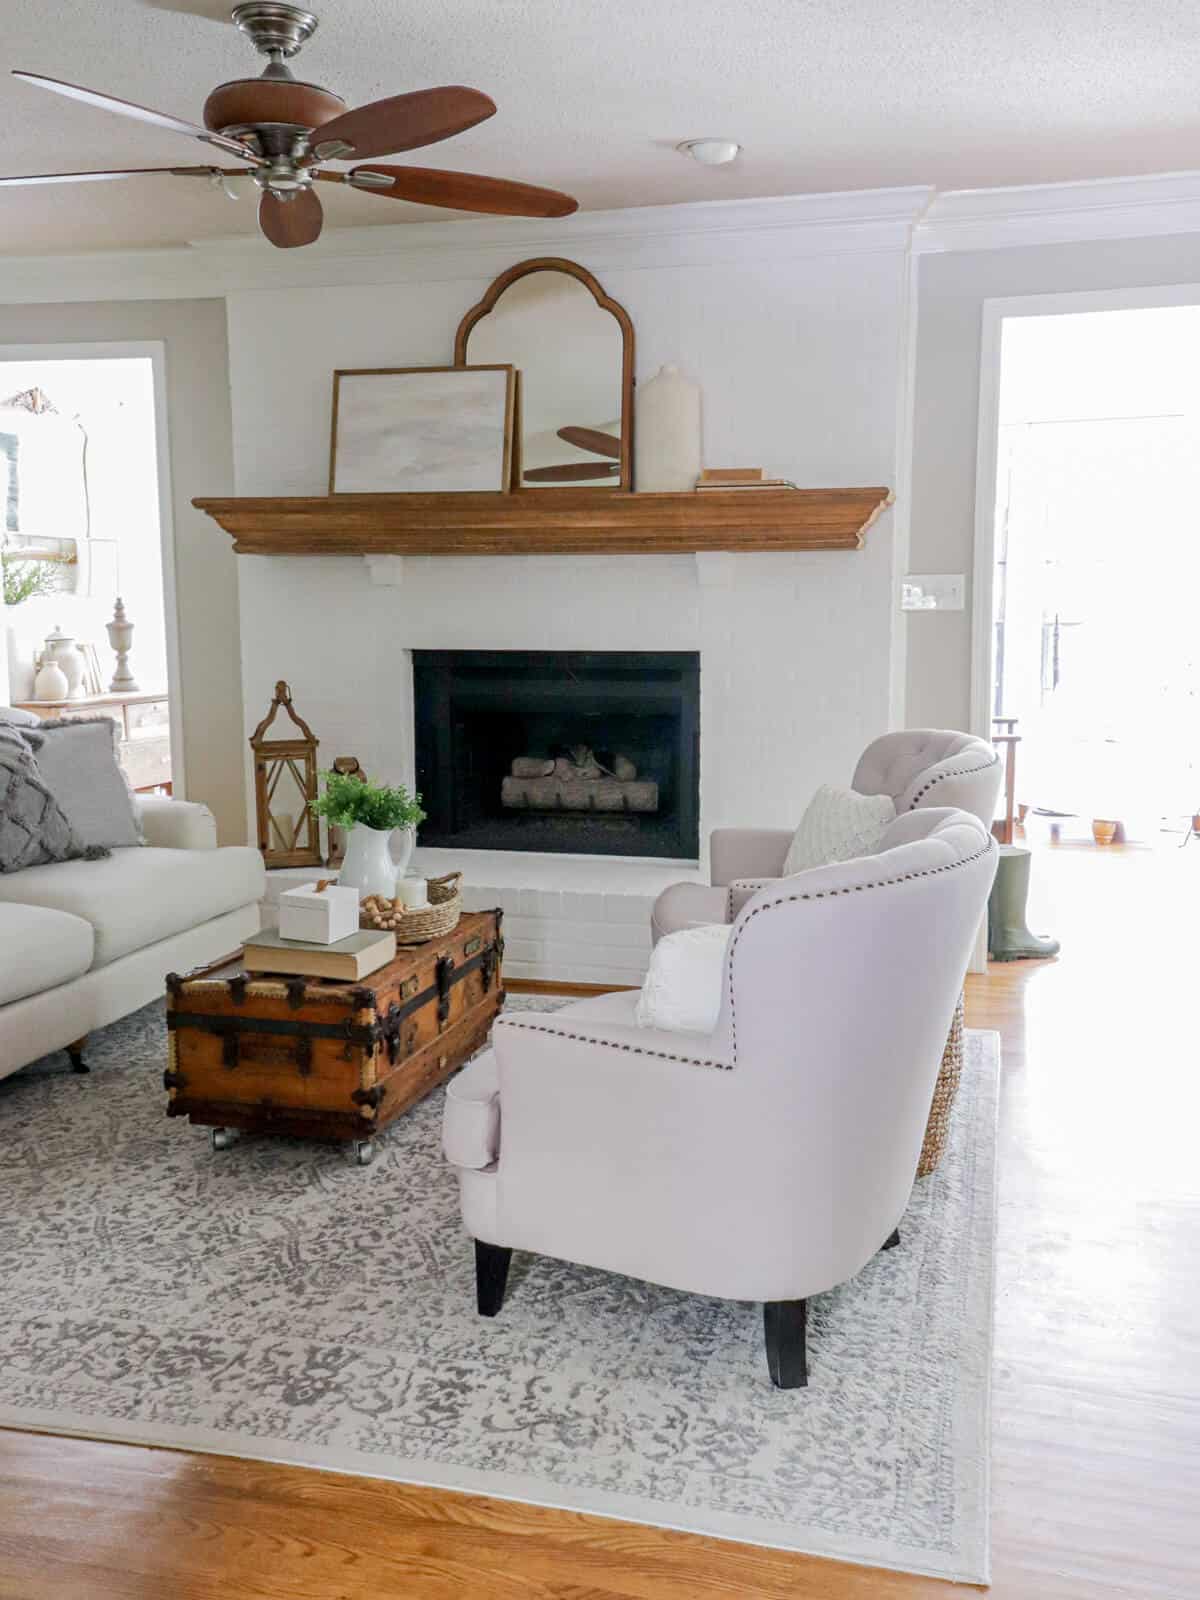 living room styled for summer with whites, wood grains and grays